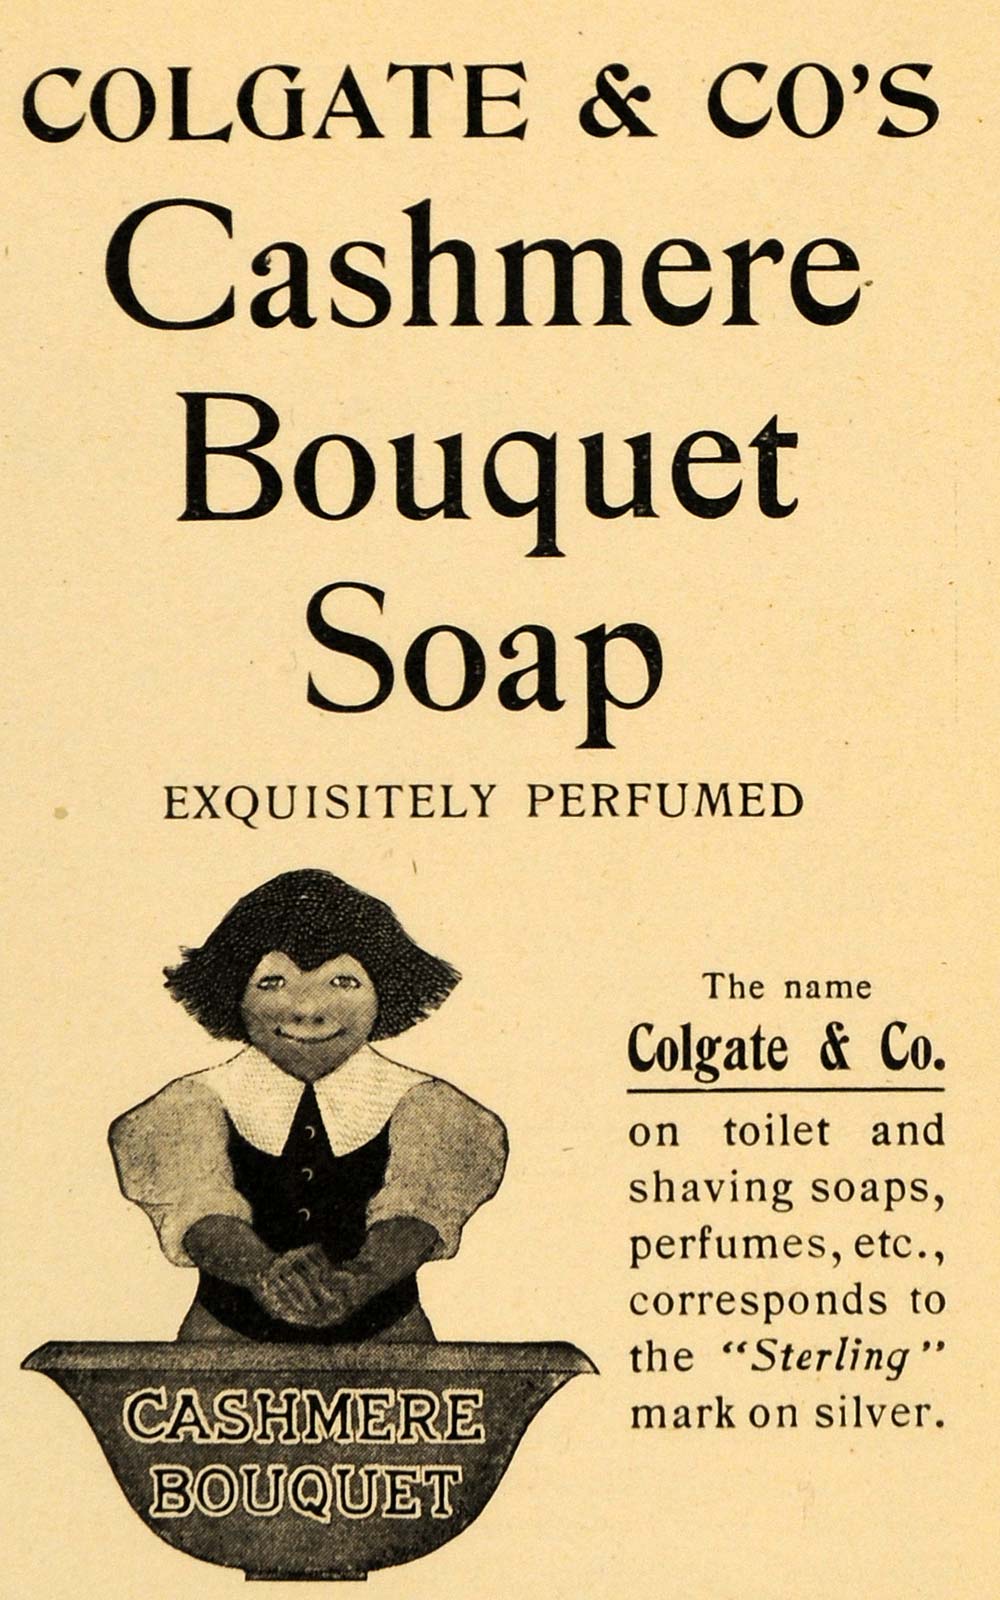 1900 Ad Colgate Cashmere Bouquet Soaps Perfumes Toilet Waters Boy Washing LHJ4